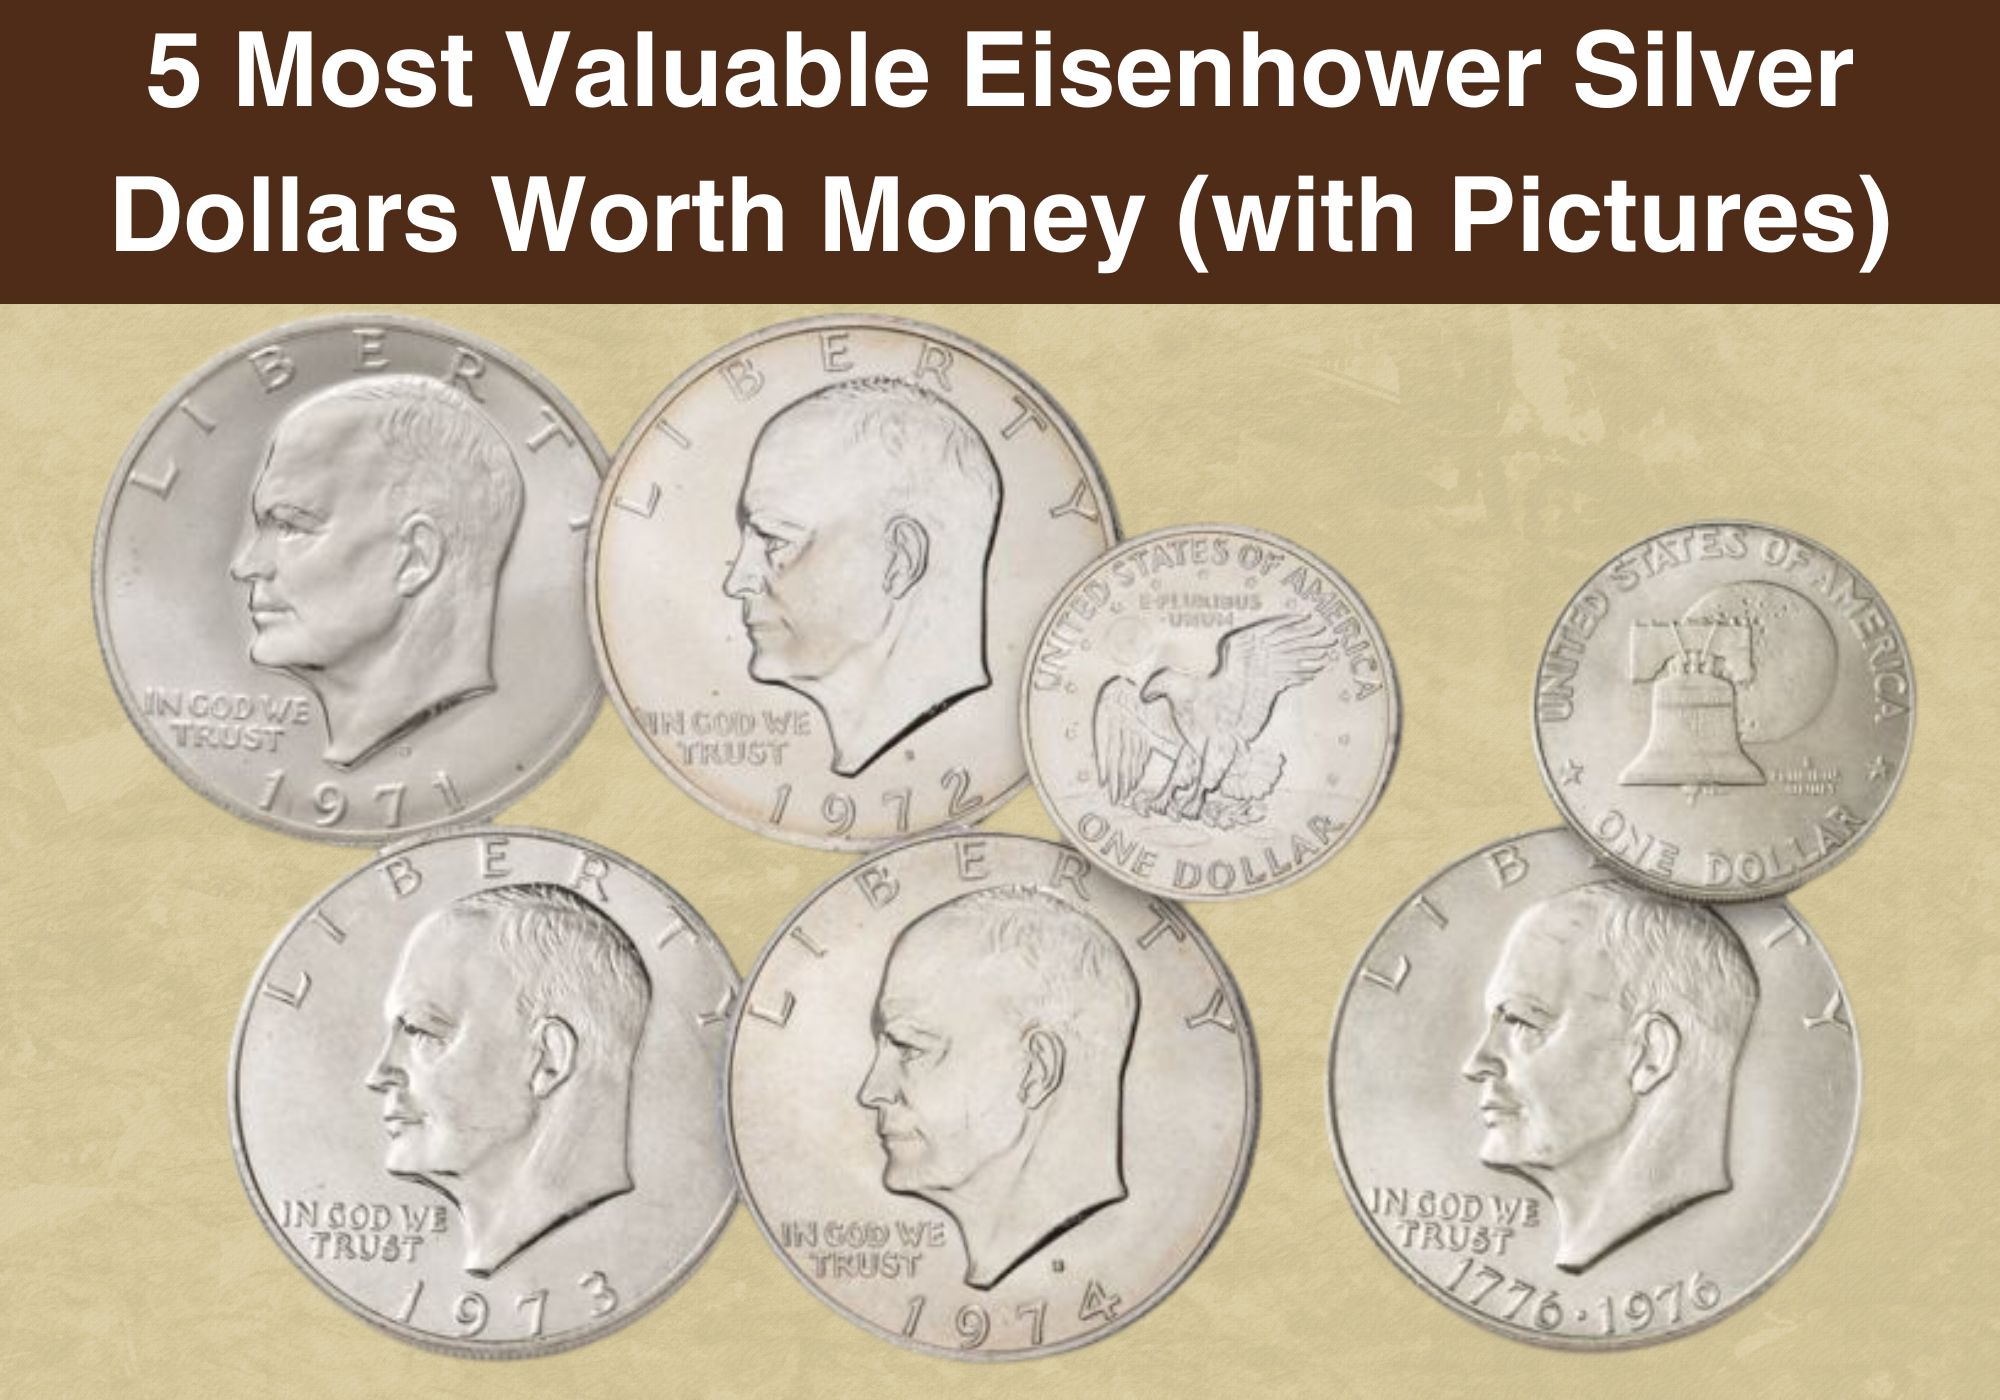 5 Most Valuable Eisenhower Silver Dollars Worth Money (with Pictures)